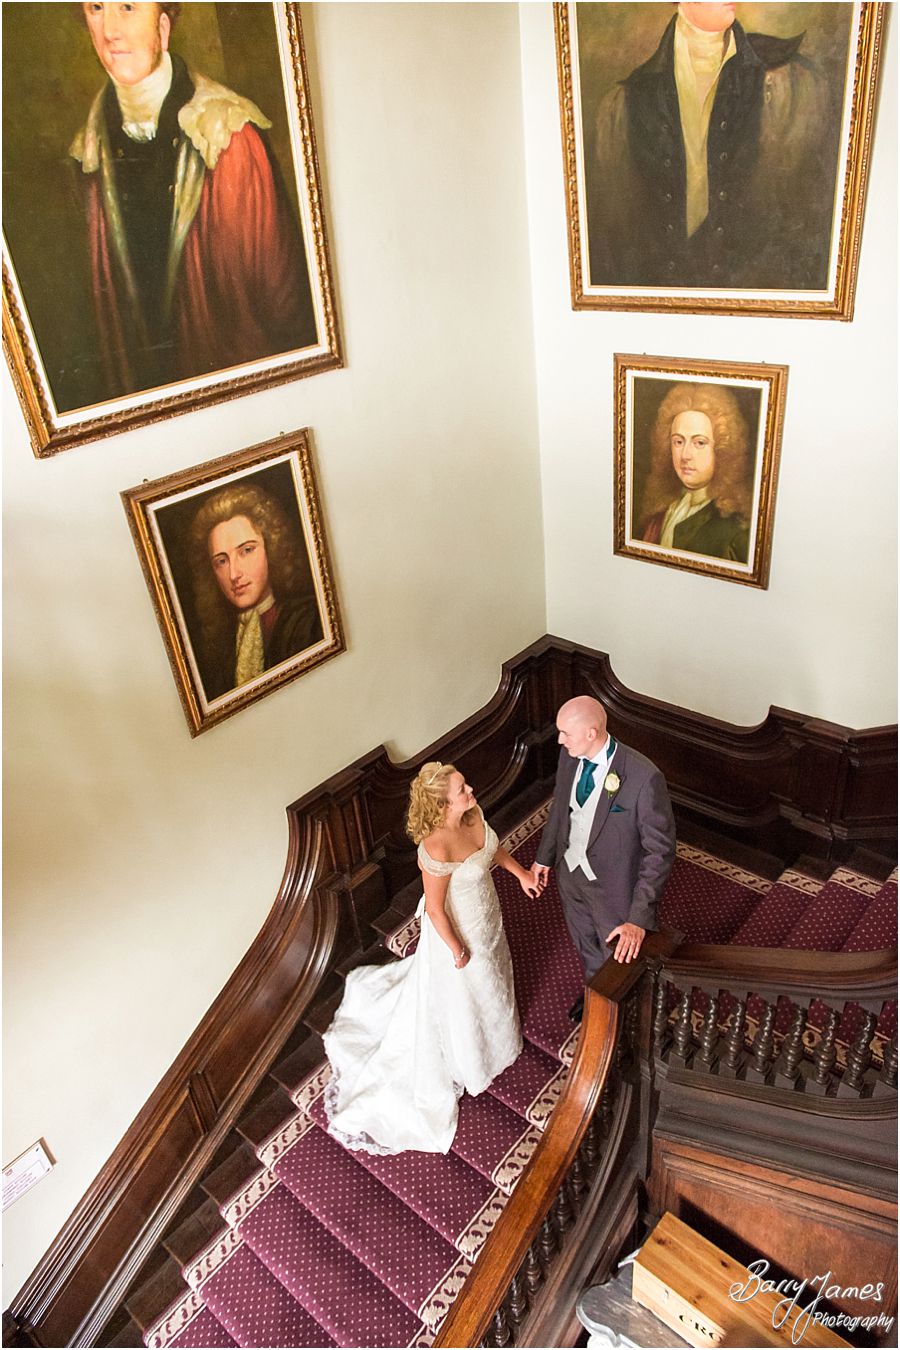 Creative wedding photography at Castle Bromwich Hall Hotel in Birmingham by Experienced Professional Wedding Photographer Barry James